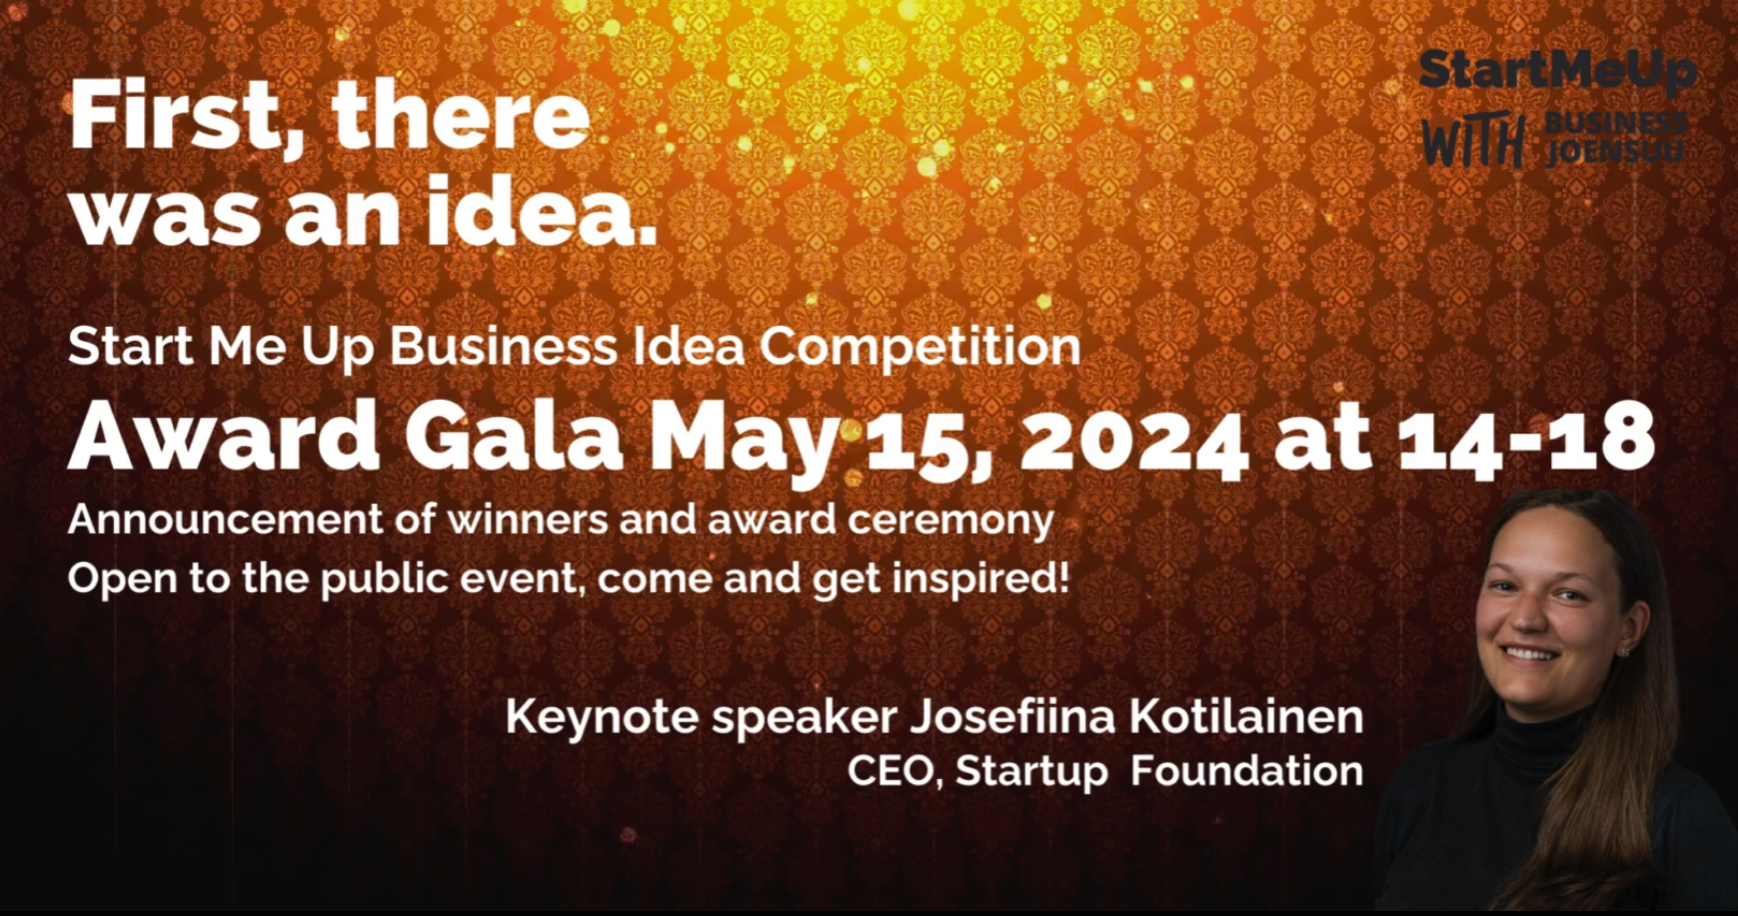 Start Me Up Business Idea Competition Award Gala on May 15, 2024